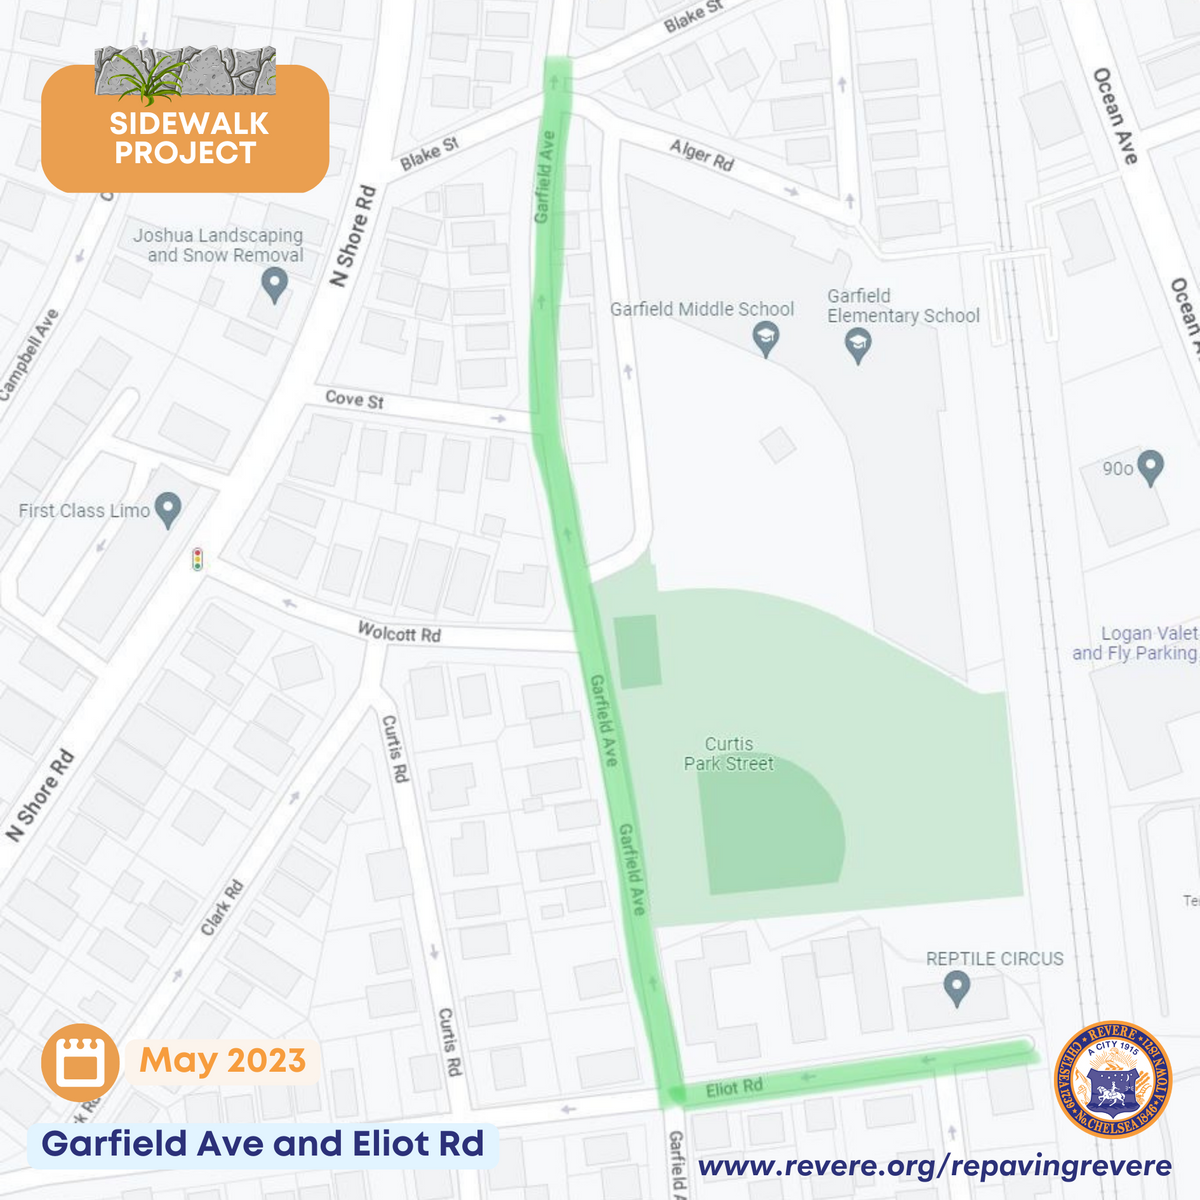 Garfield Ave and Eliot Rd - Sidewalk Project